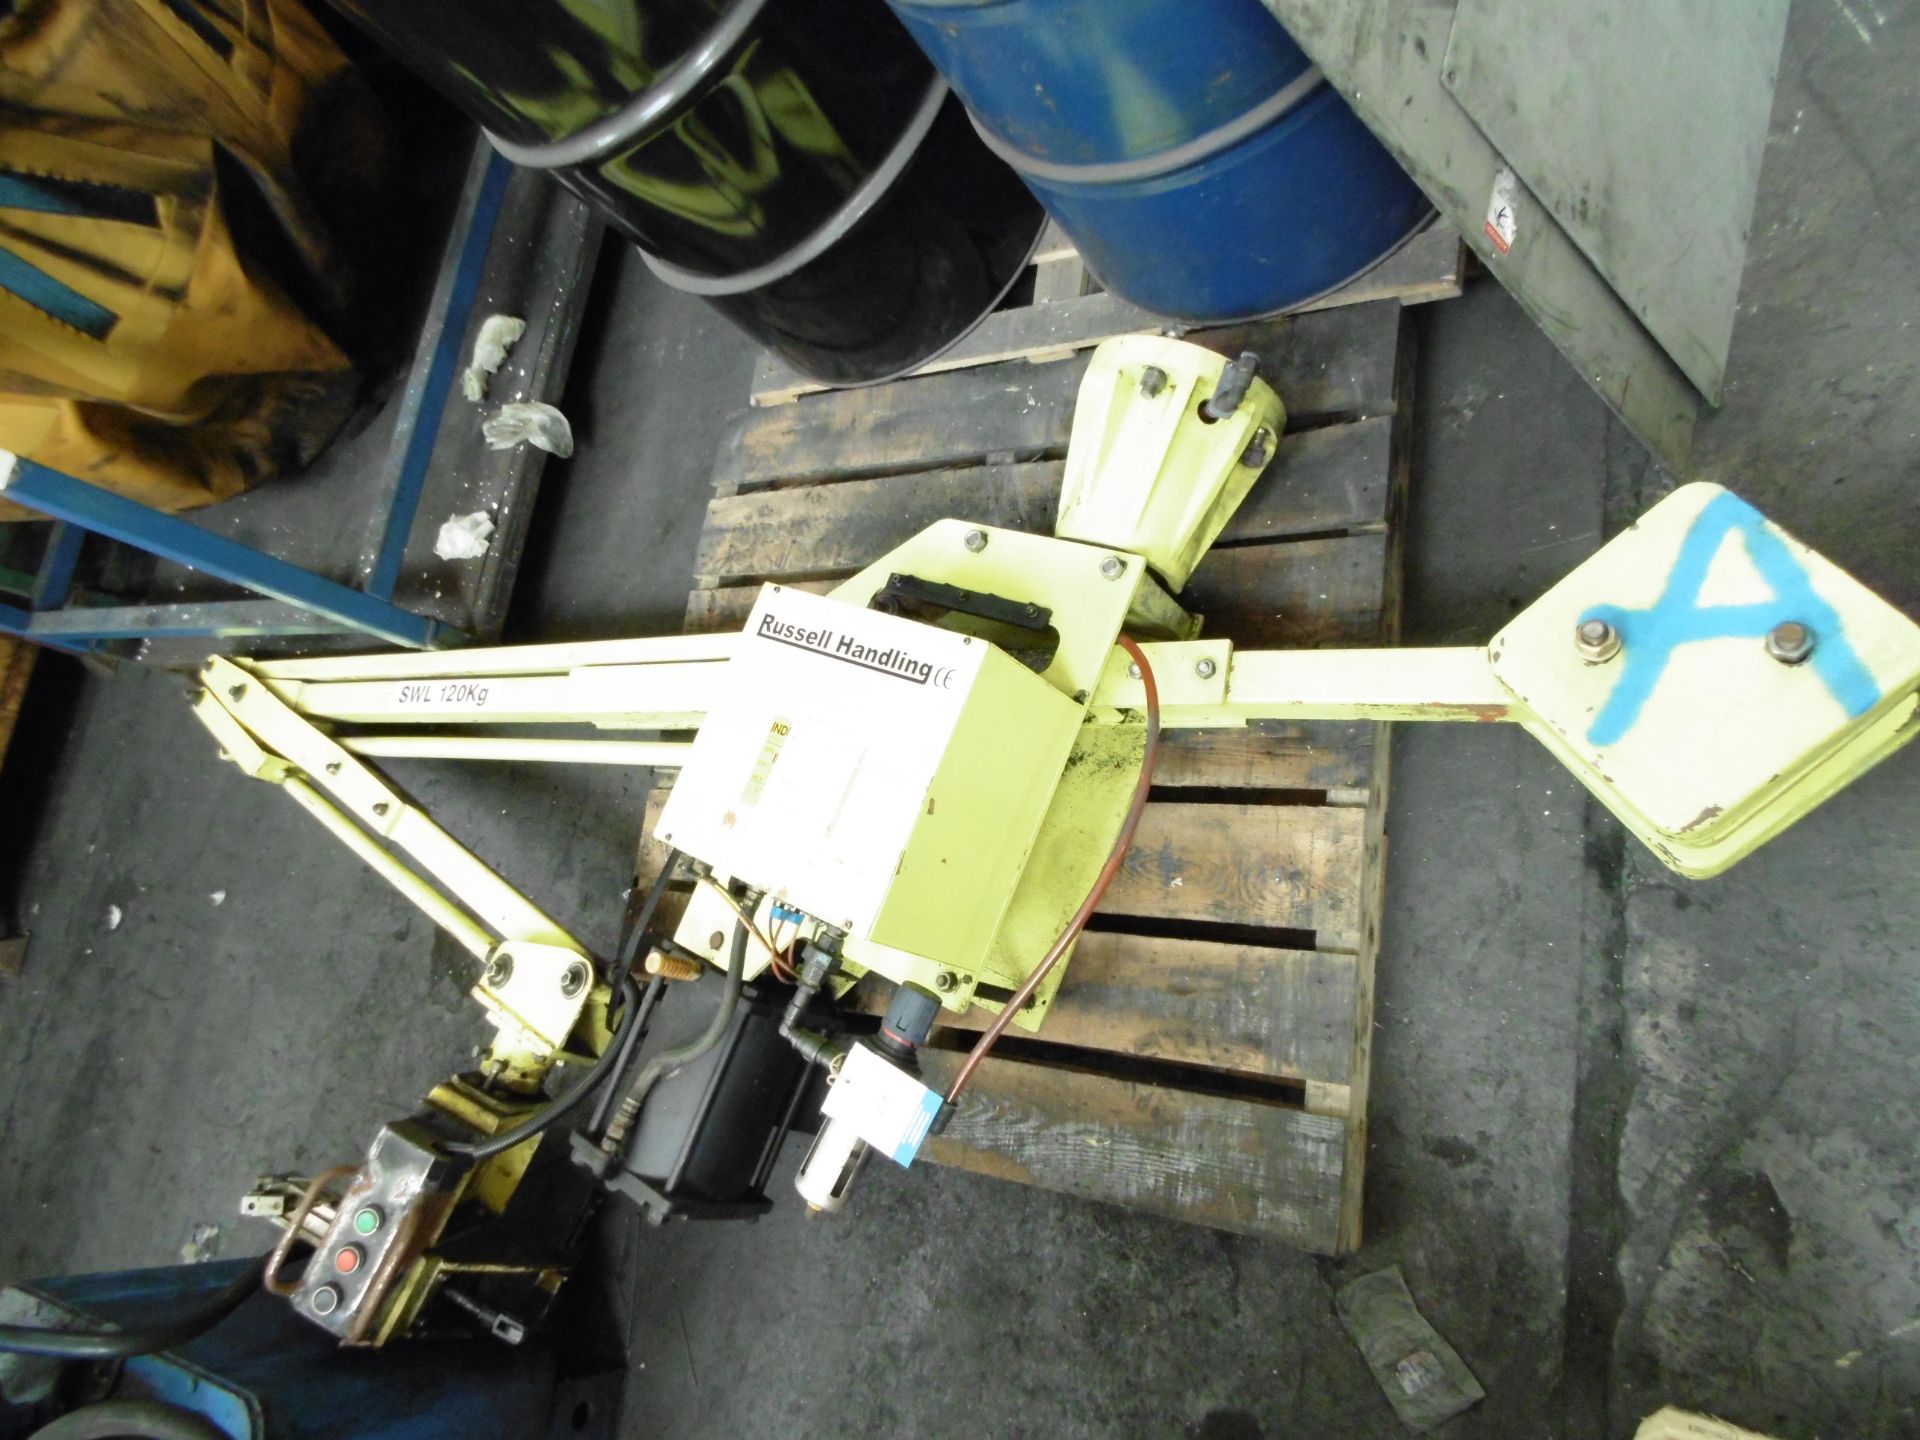 * Russell Handling Type RWH150 Pneumatic Handling Arm; SWL 120KG. Please note there is a £10 plus